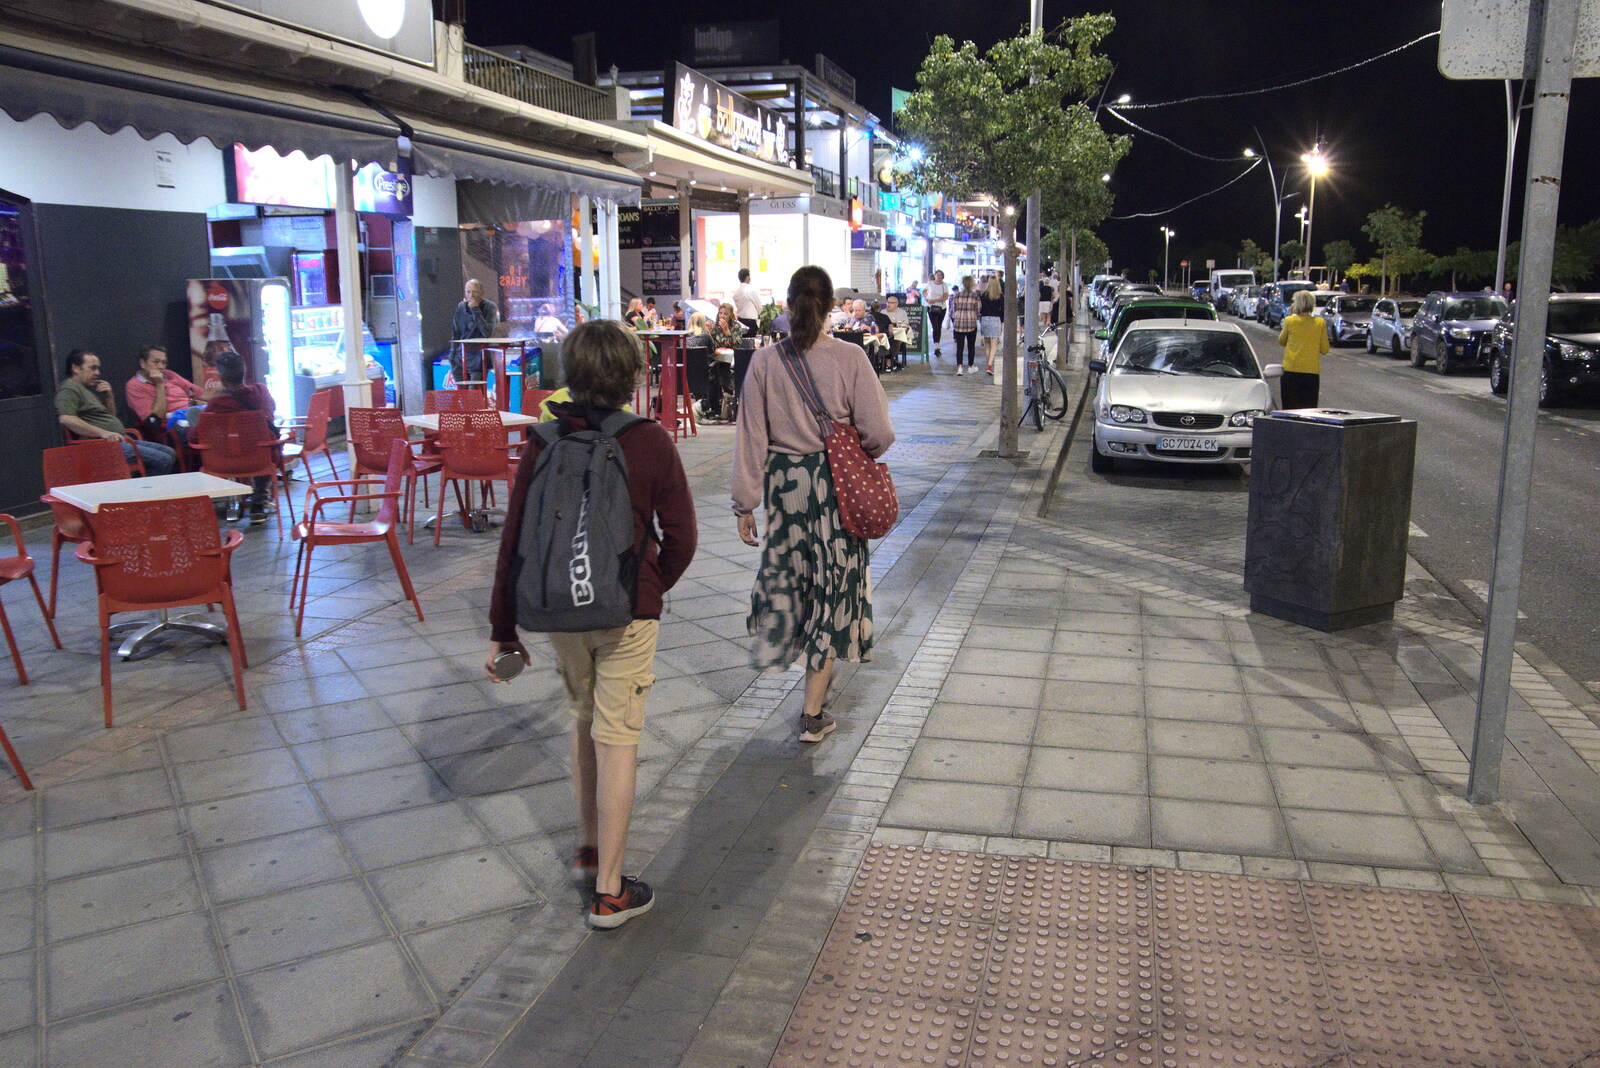 The Costa Mar Strip at night from Five Days in Lanzarote, Canary Islands, Spain - 24th October 2021